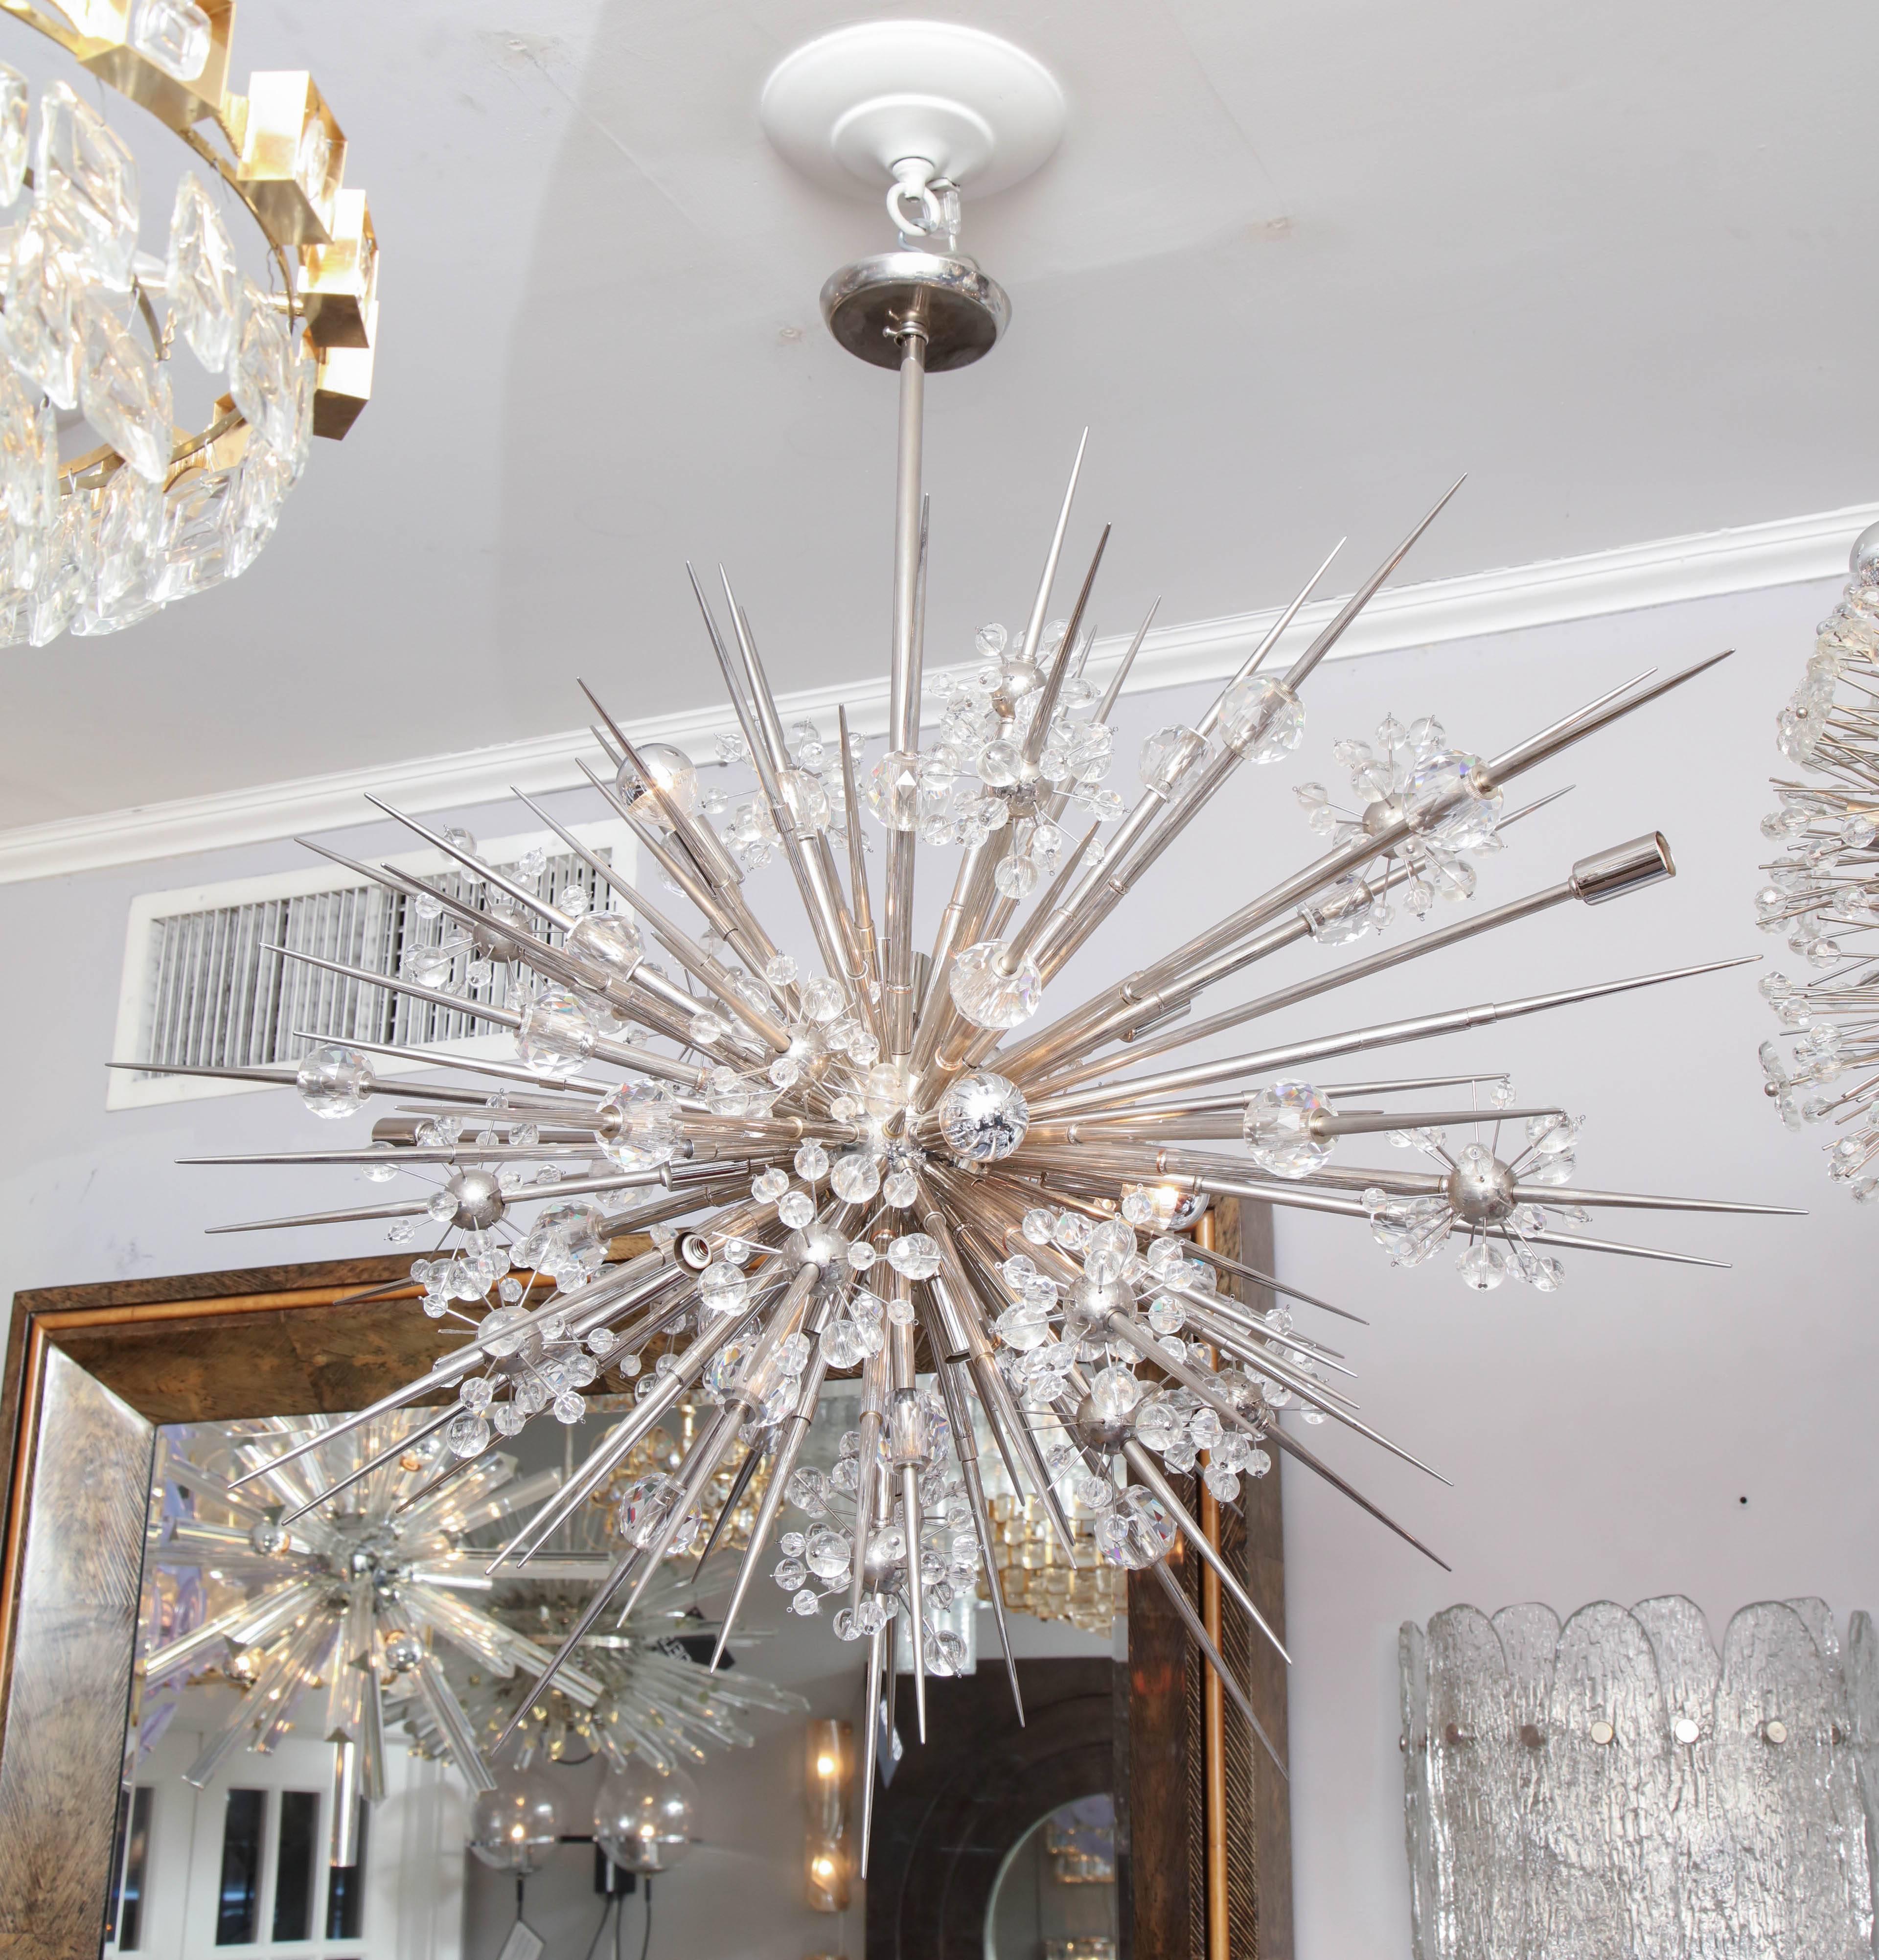 Custom Austrian crystal spiked Sputnik chandelier in polished nickel. Customization is available in different sizes and finishes.